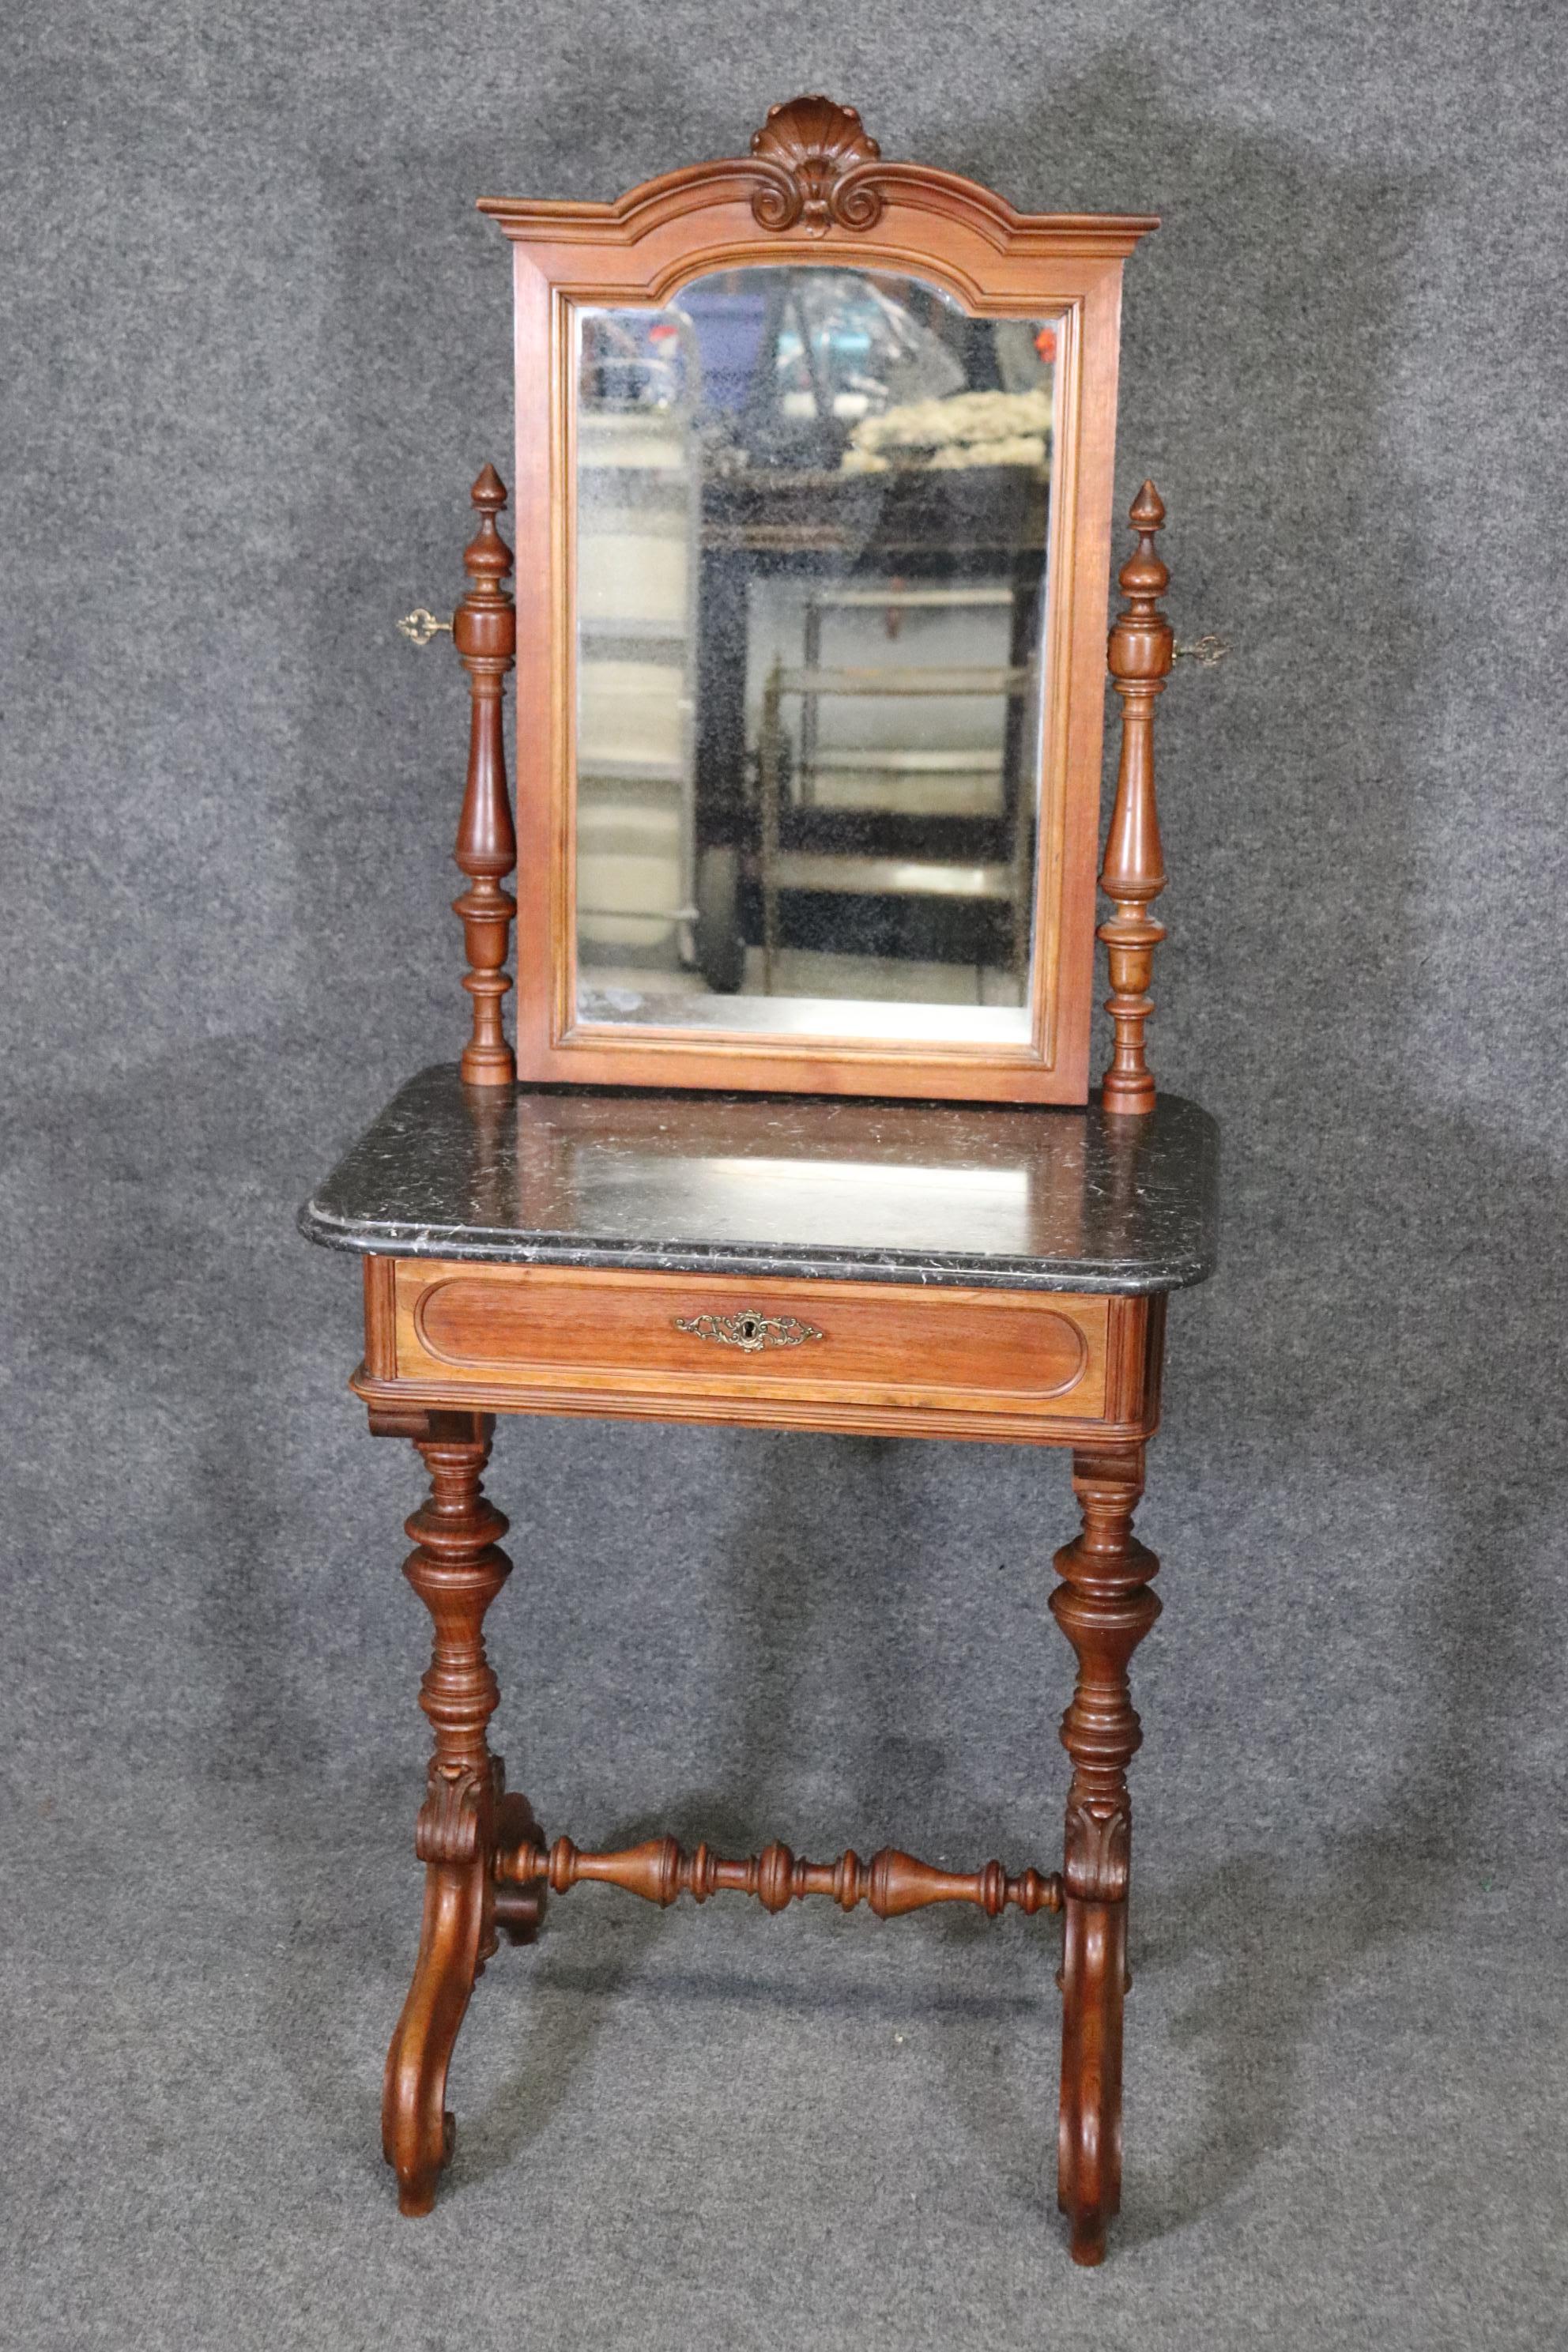 Dimensions- H: 57 1/2in W: 24 1/2in D: 18in.
This Antique Carved Victorian Marble Top Wash Stand Vanity is really unique and made of the highest quality woods and marble! If you take a look at the photos provided you will see the attention to